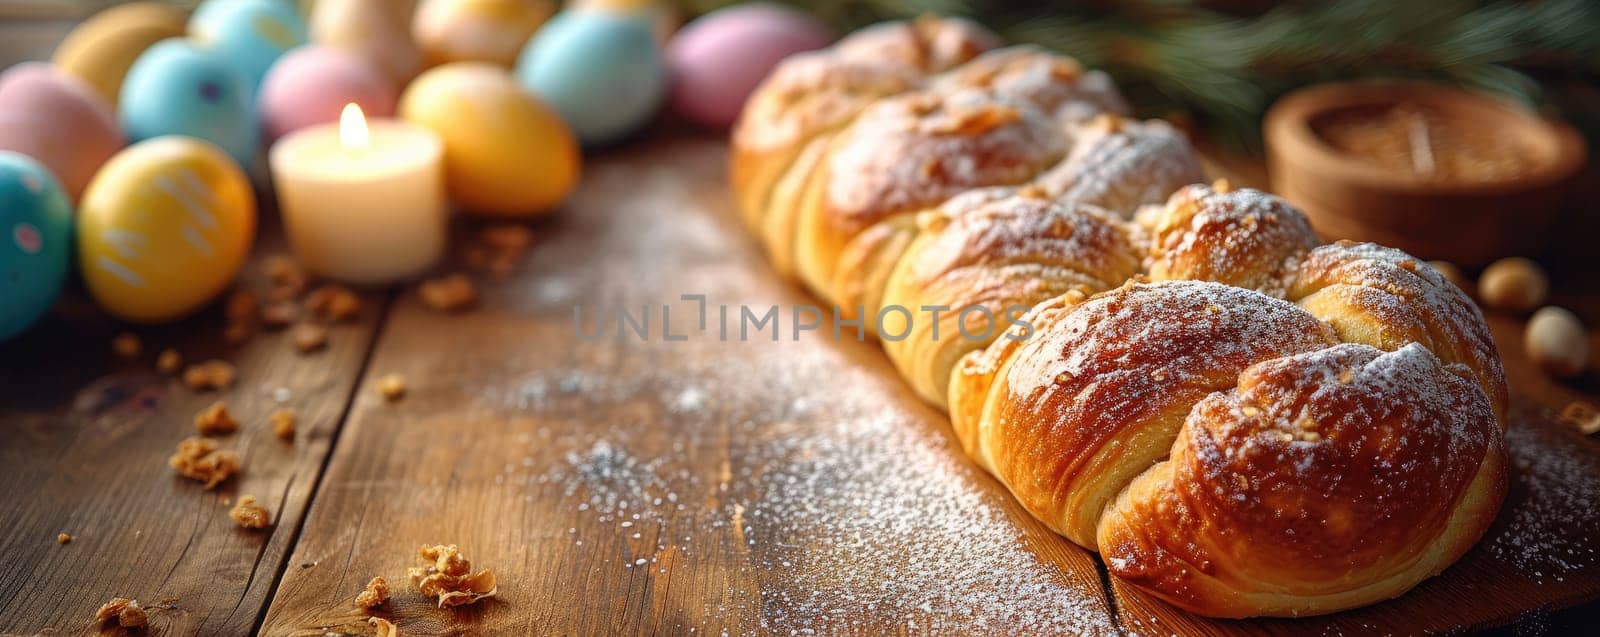 Easter cake and eggs on wooden background by Yurich32